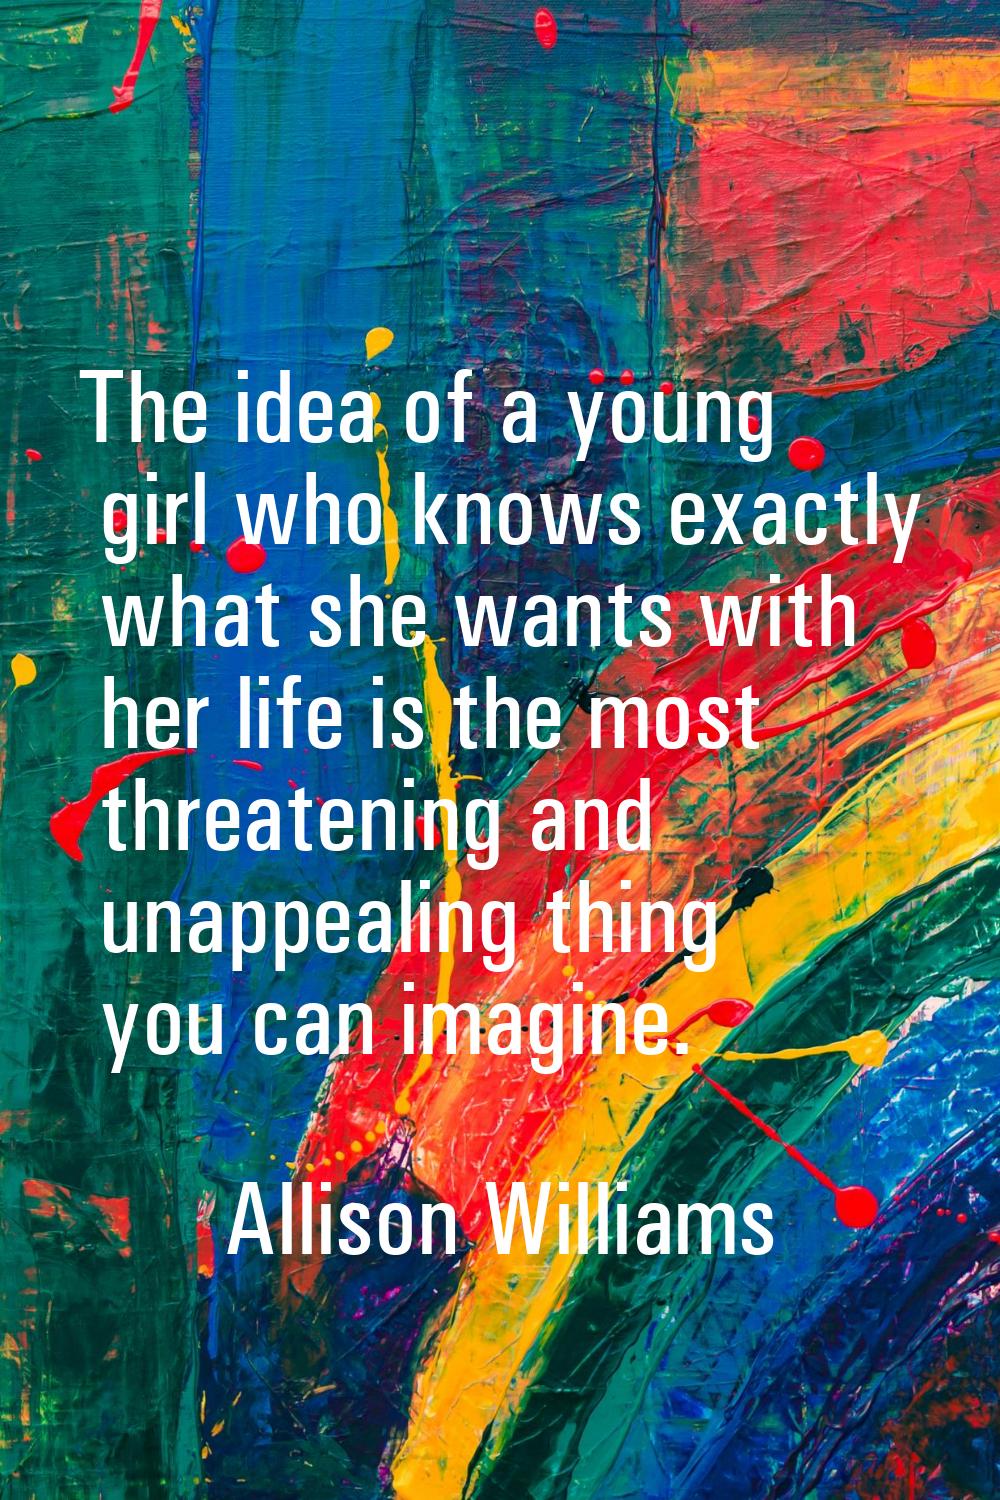 The idea of a young girl who knows exactly what she wants with her life is the most threatening and